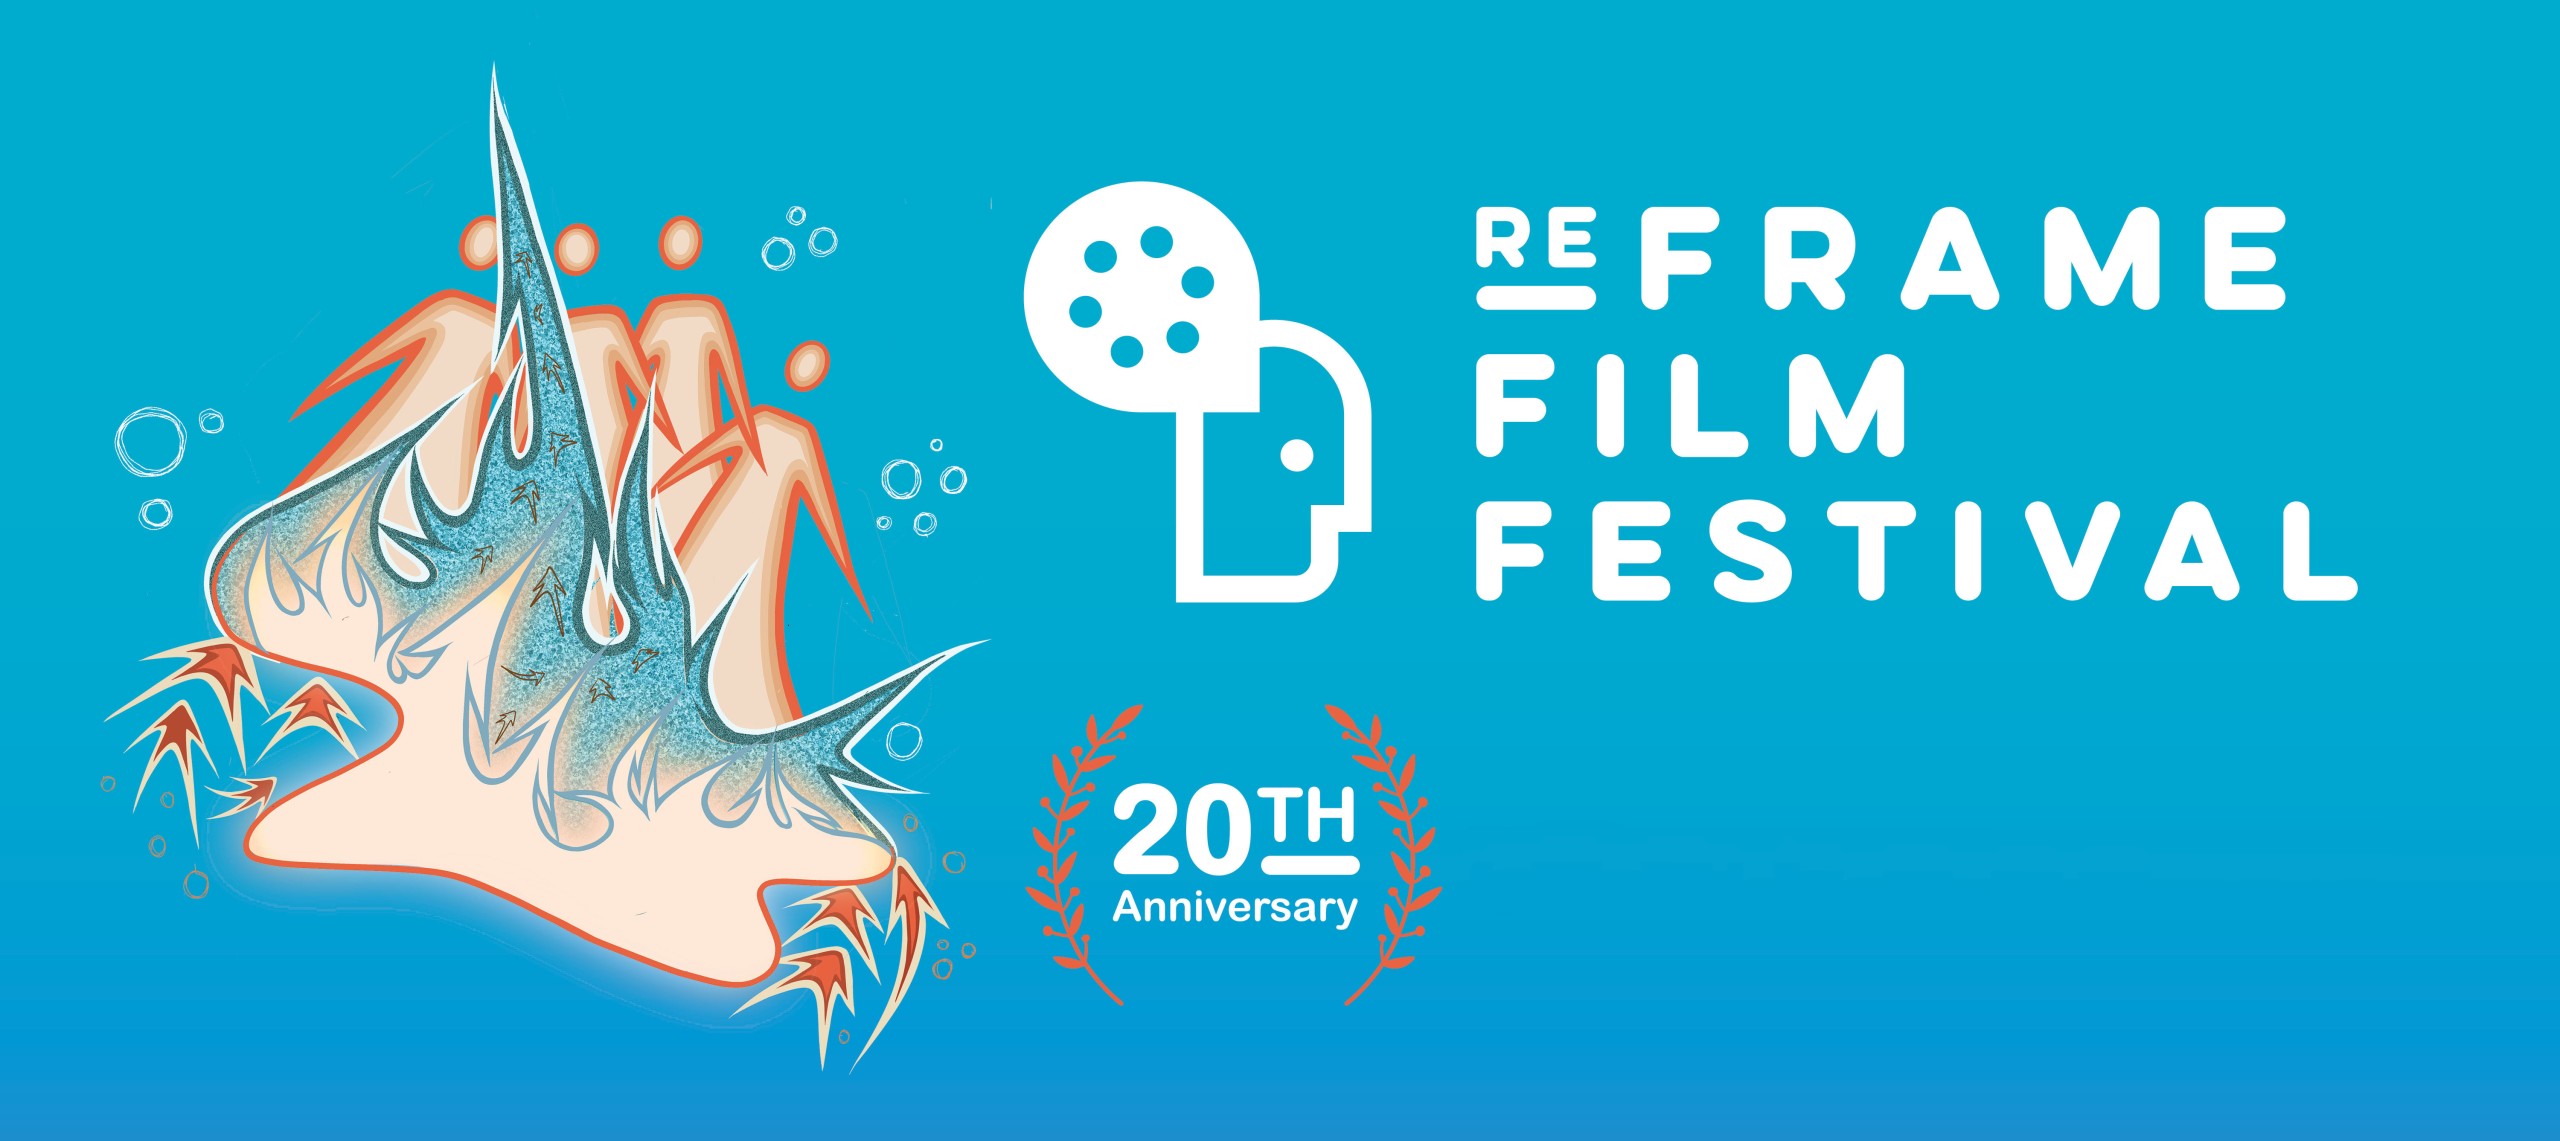 The image is a hero banner for the ReFrame Film Festival, celebrating its 20th anniversary. The event is scheduled from January 25 to February 4, 2024. The banner has a bright blue background with abstract illustrations suggesting film and creativity, such as a reel, blended with natural elements like mountains or trees, which appear to be subtly animated with small bubbles and plants. The festival's logo is prominently displayed alongside the dates, and the design conveys a sense of artistic flair and cinematic wonder. Laurels adorn the words, "20th Anniversary".